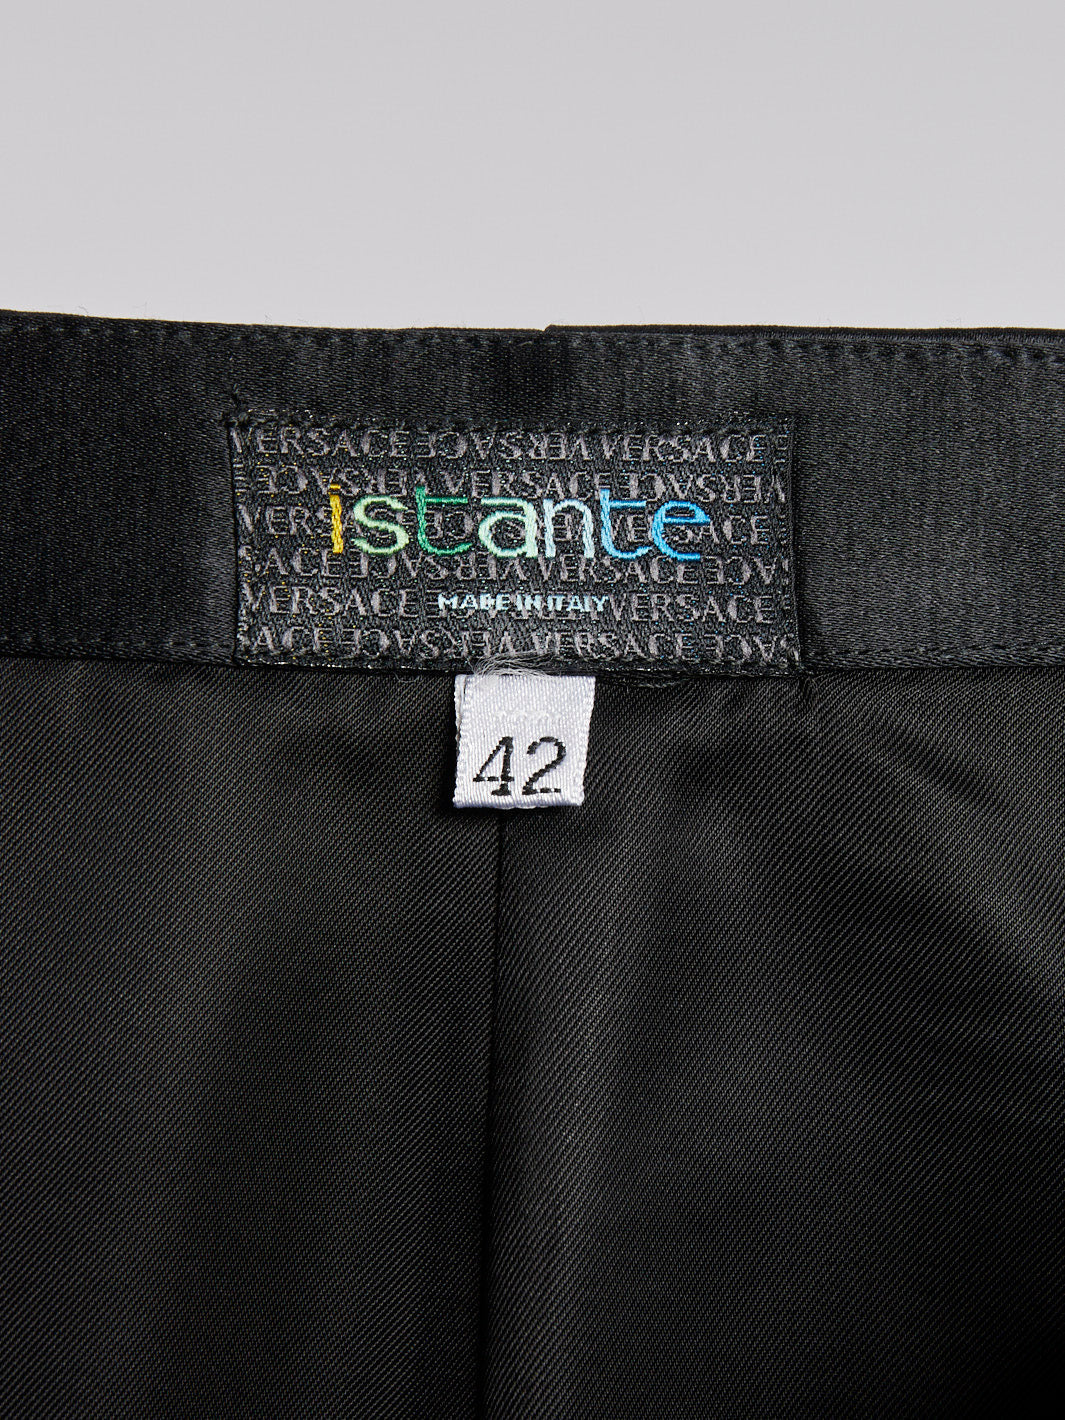 Black satin Istante miniskirt from the 1990s